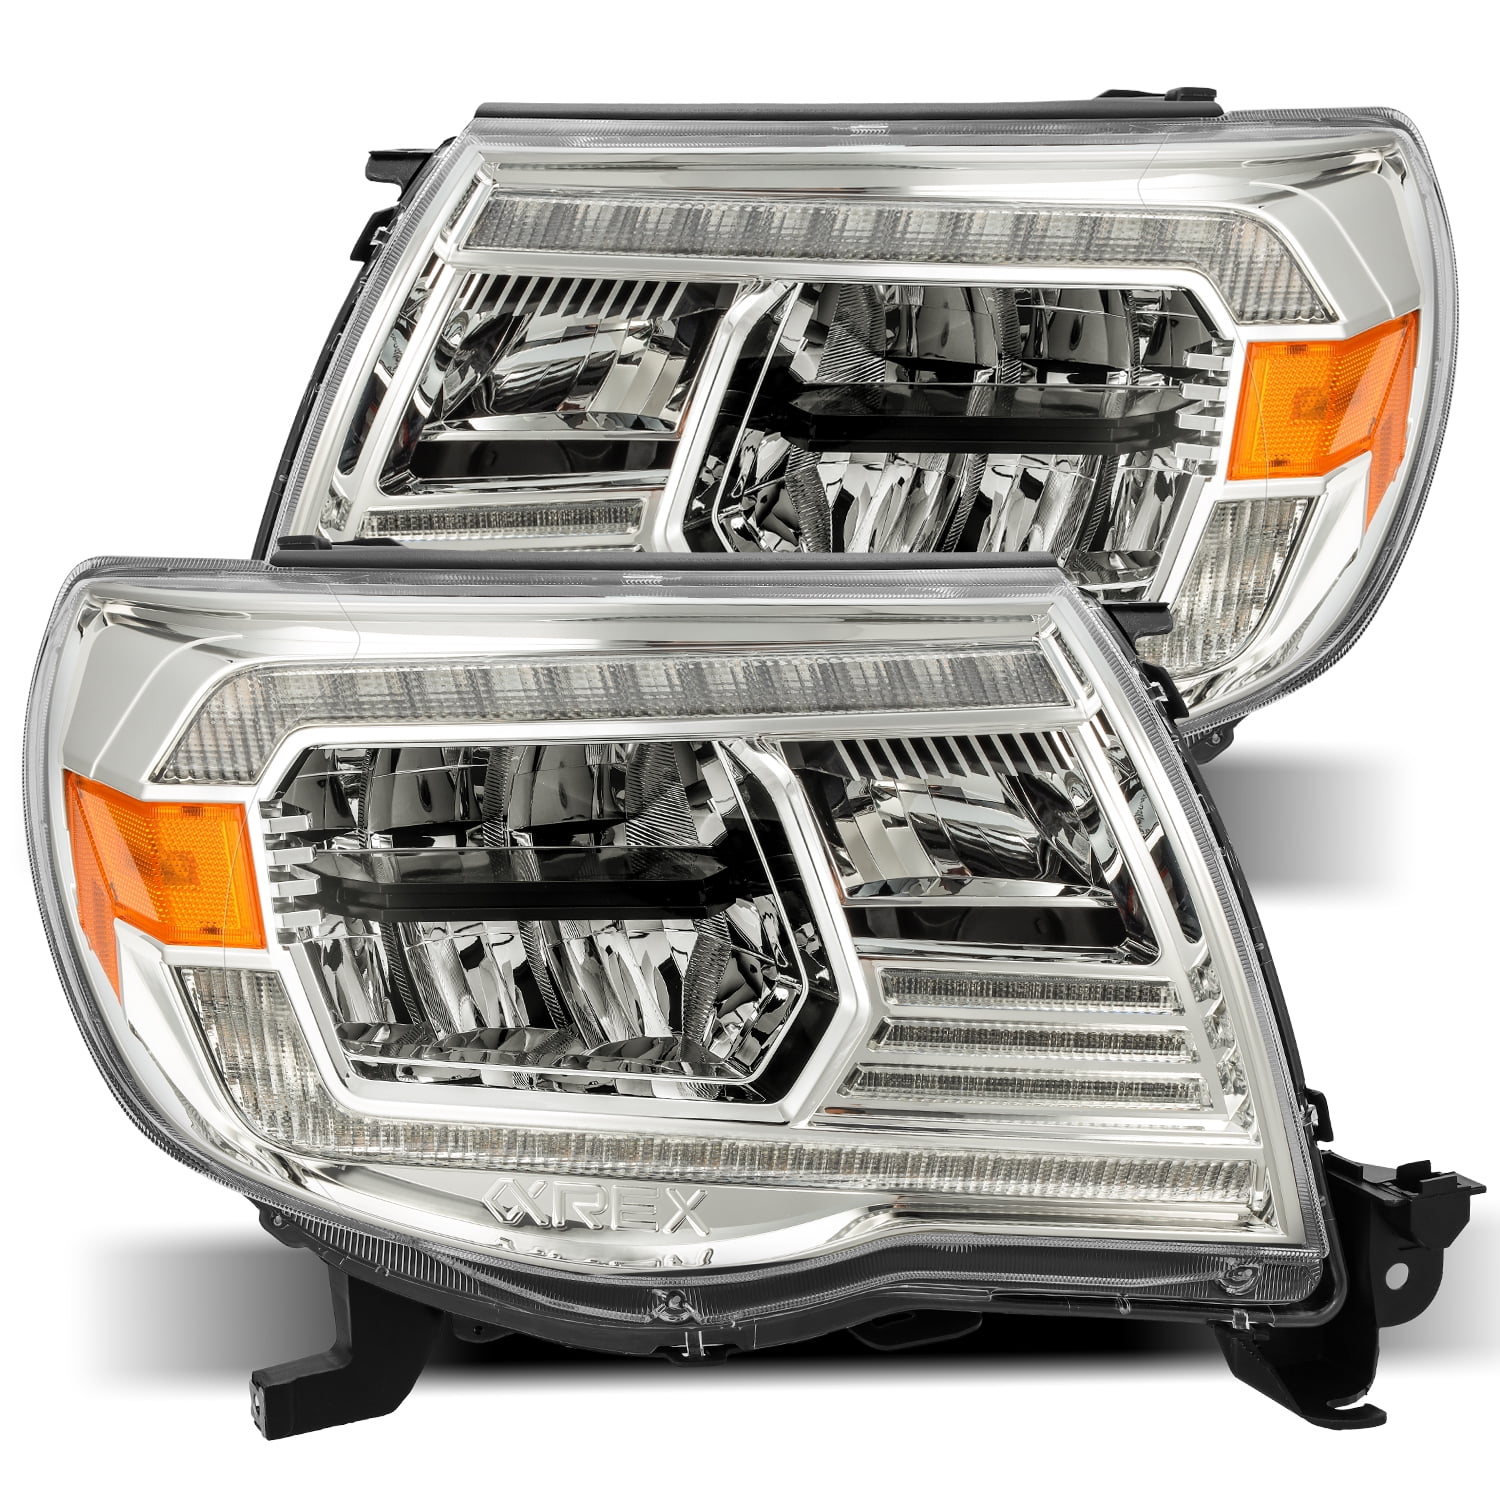 ACANII Passenger Side Chrome Headlamps Replacement Driver OE Style For 2004 2005 2006 Nissan Sentra Headlights 